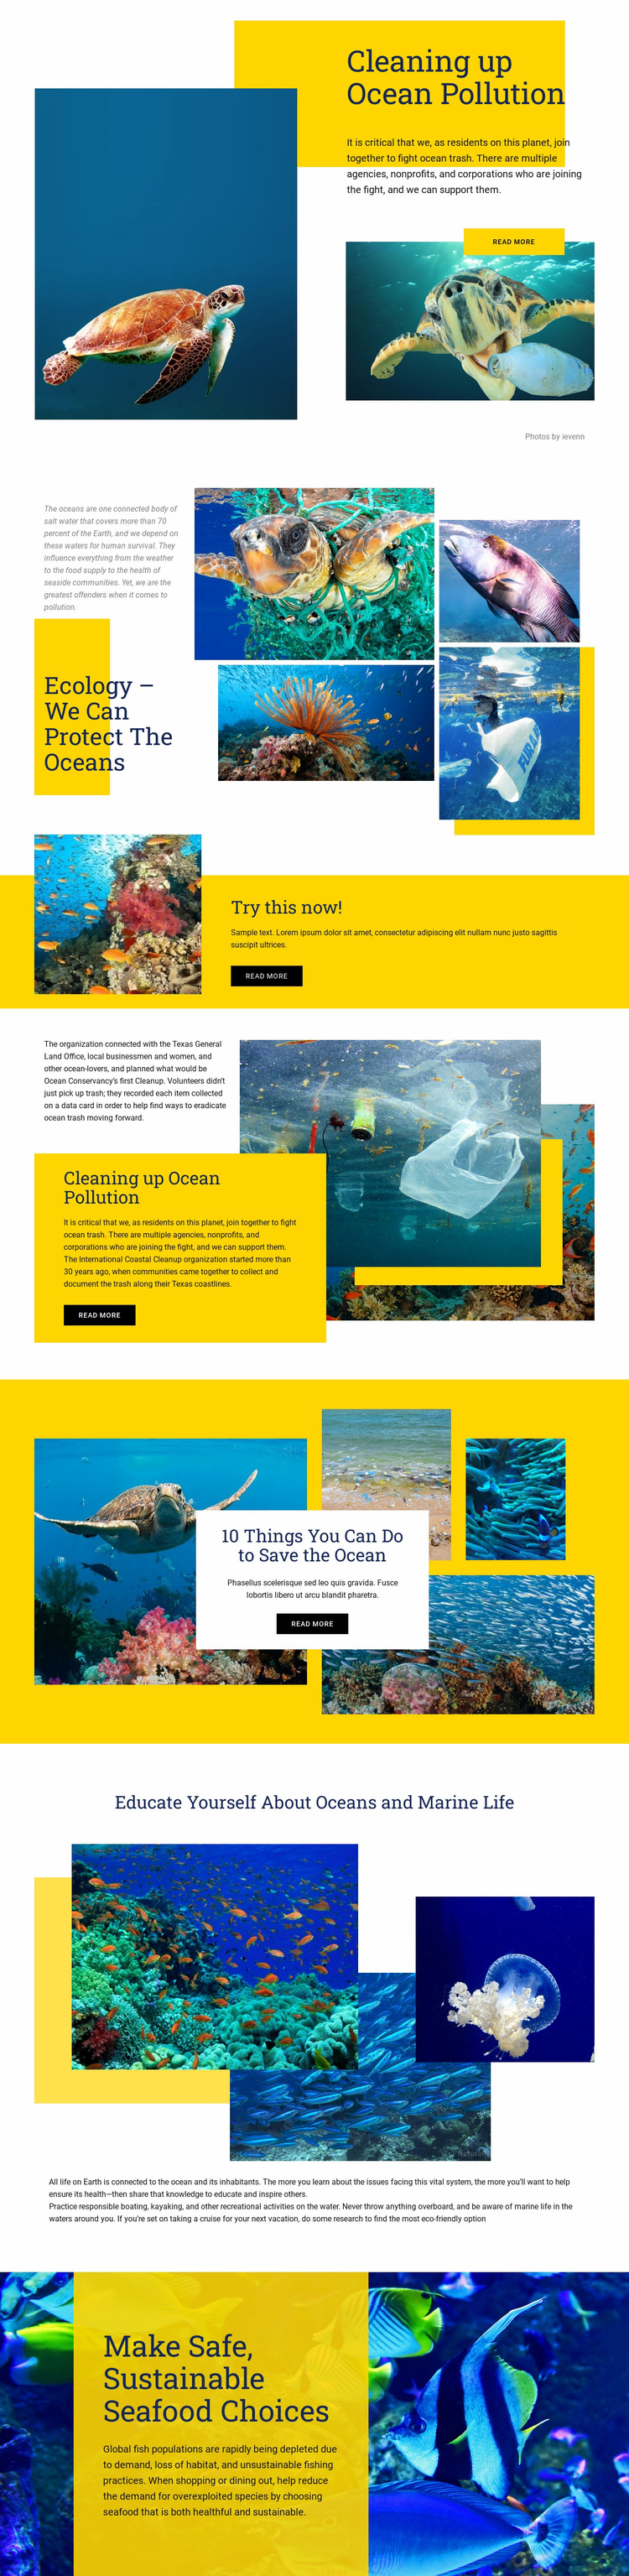 Protect The Oceans Website Builder Templates